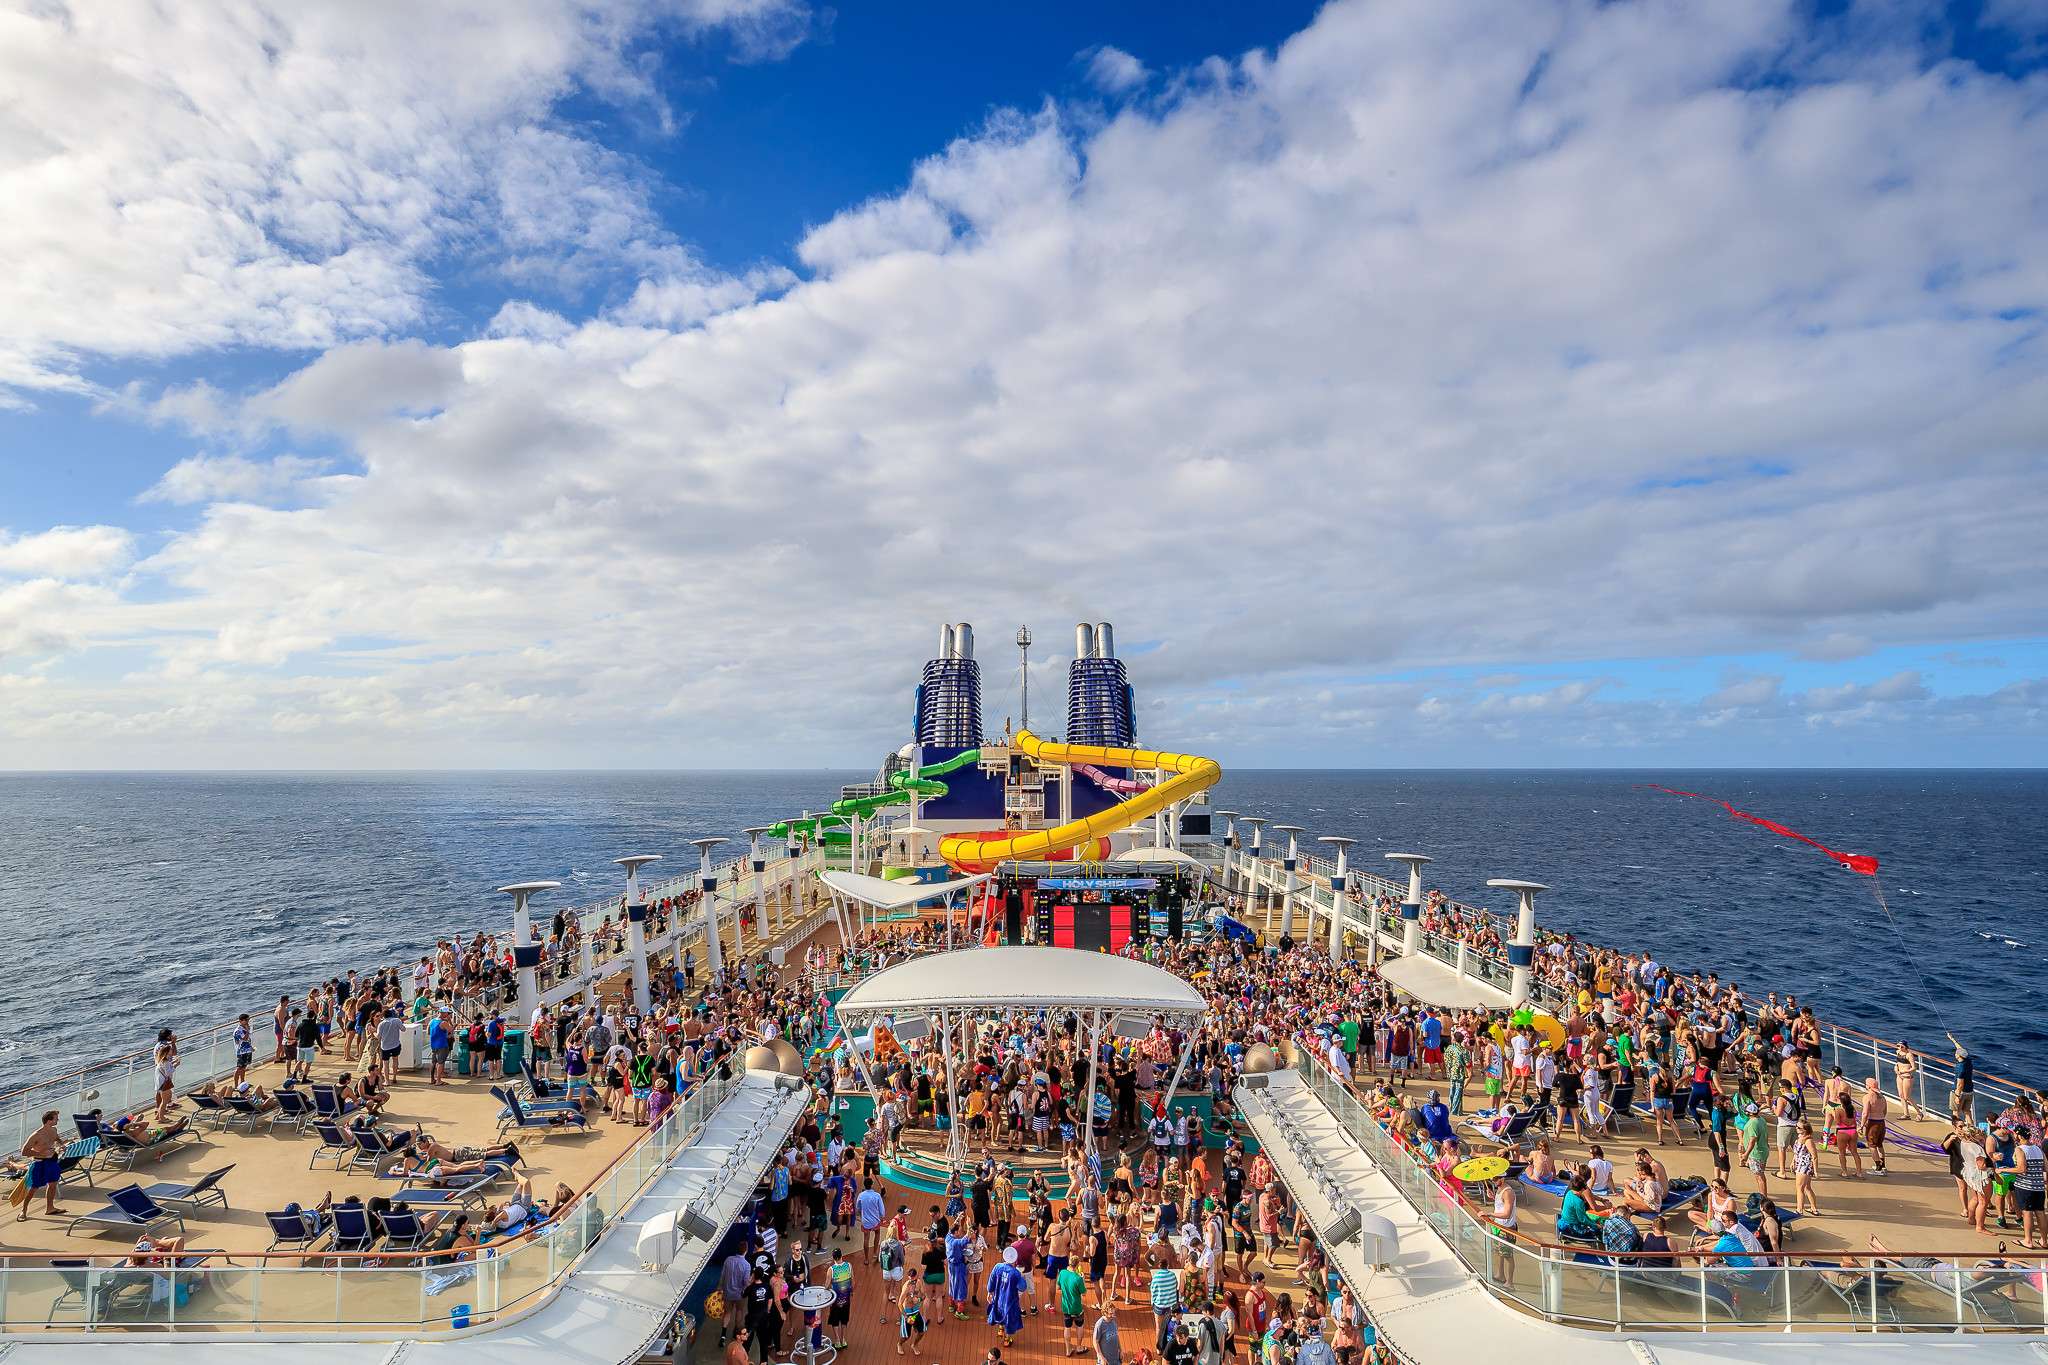 Holy Ship! 11.0 Results In 21 Drug Related Arrests Before Setting Sail